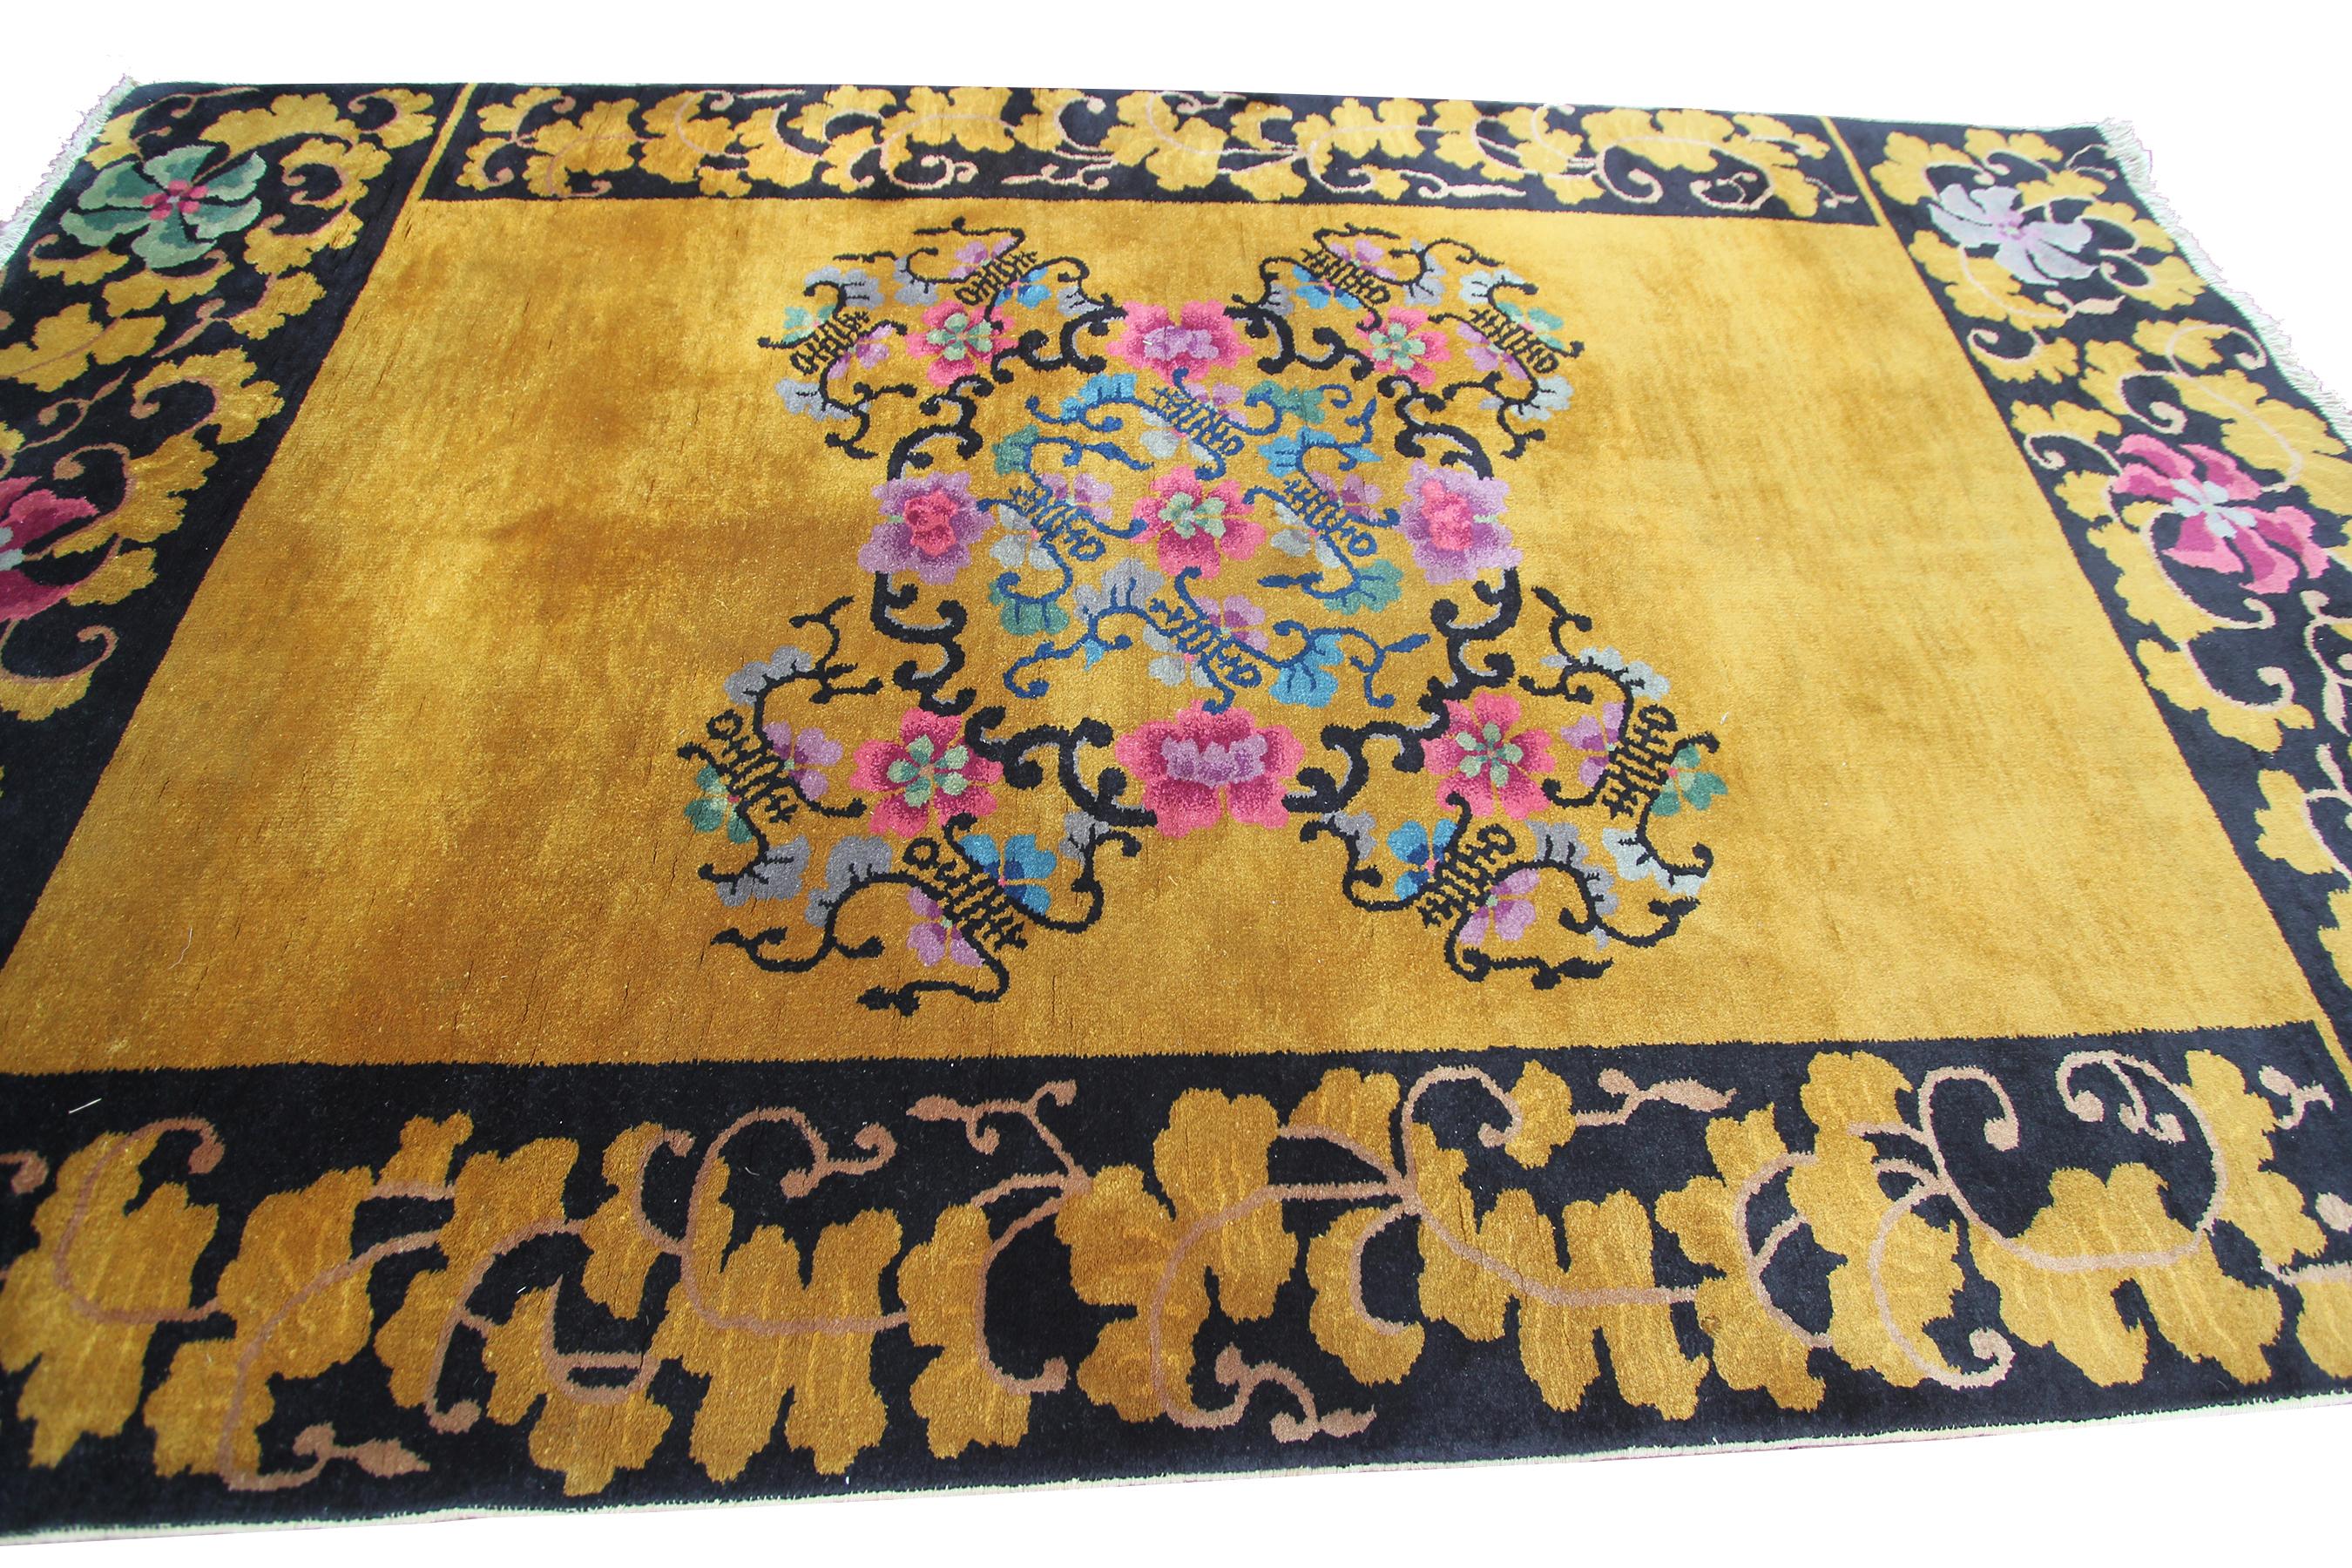 Early 20th Century Gold Antique Art Deco Rug Antique Chinese Rug Walter Nichols Black 4x7 122x203cm For Sale